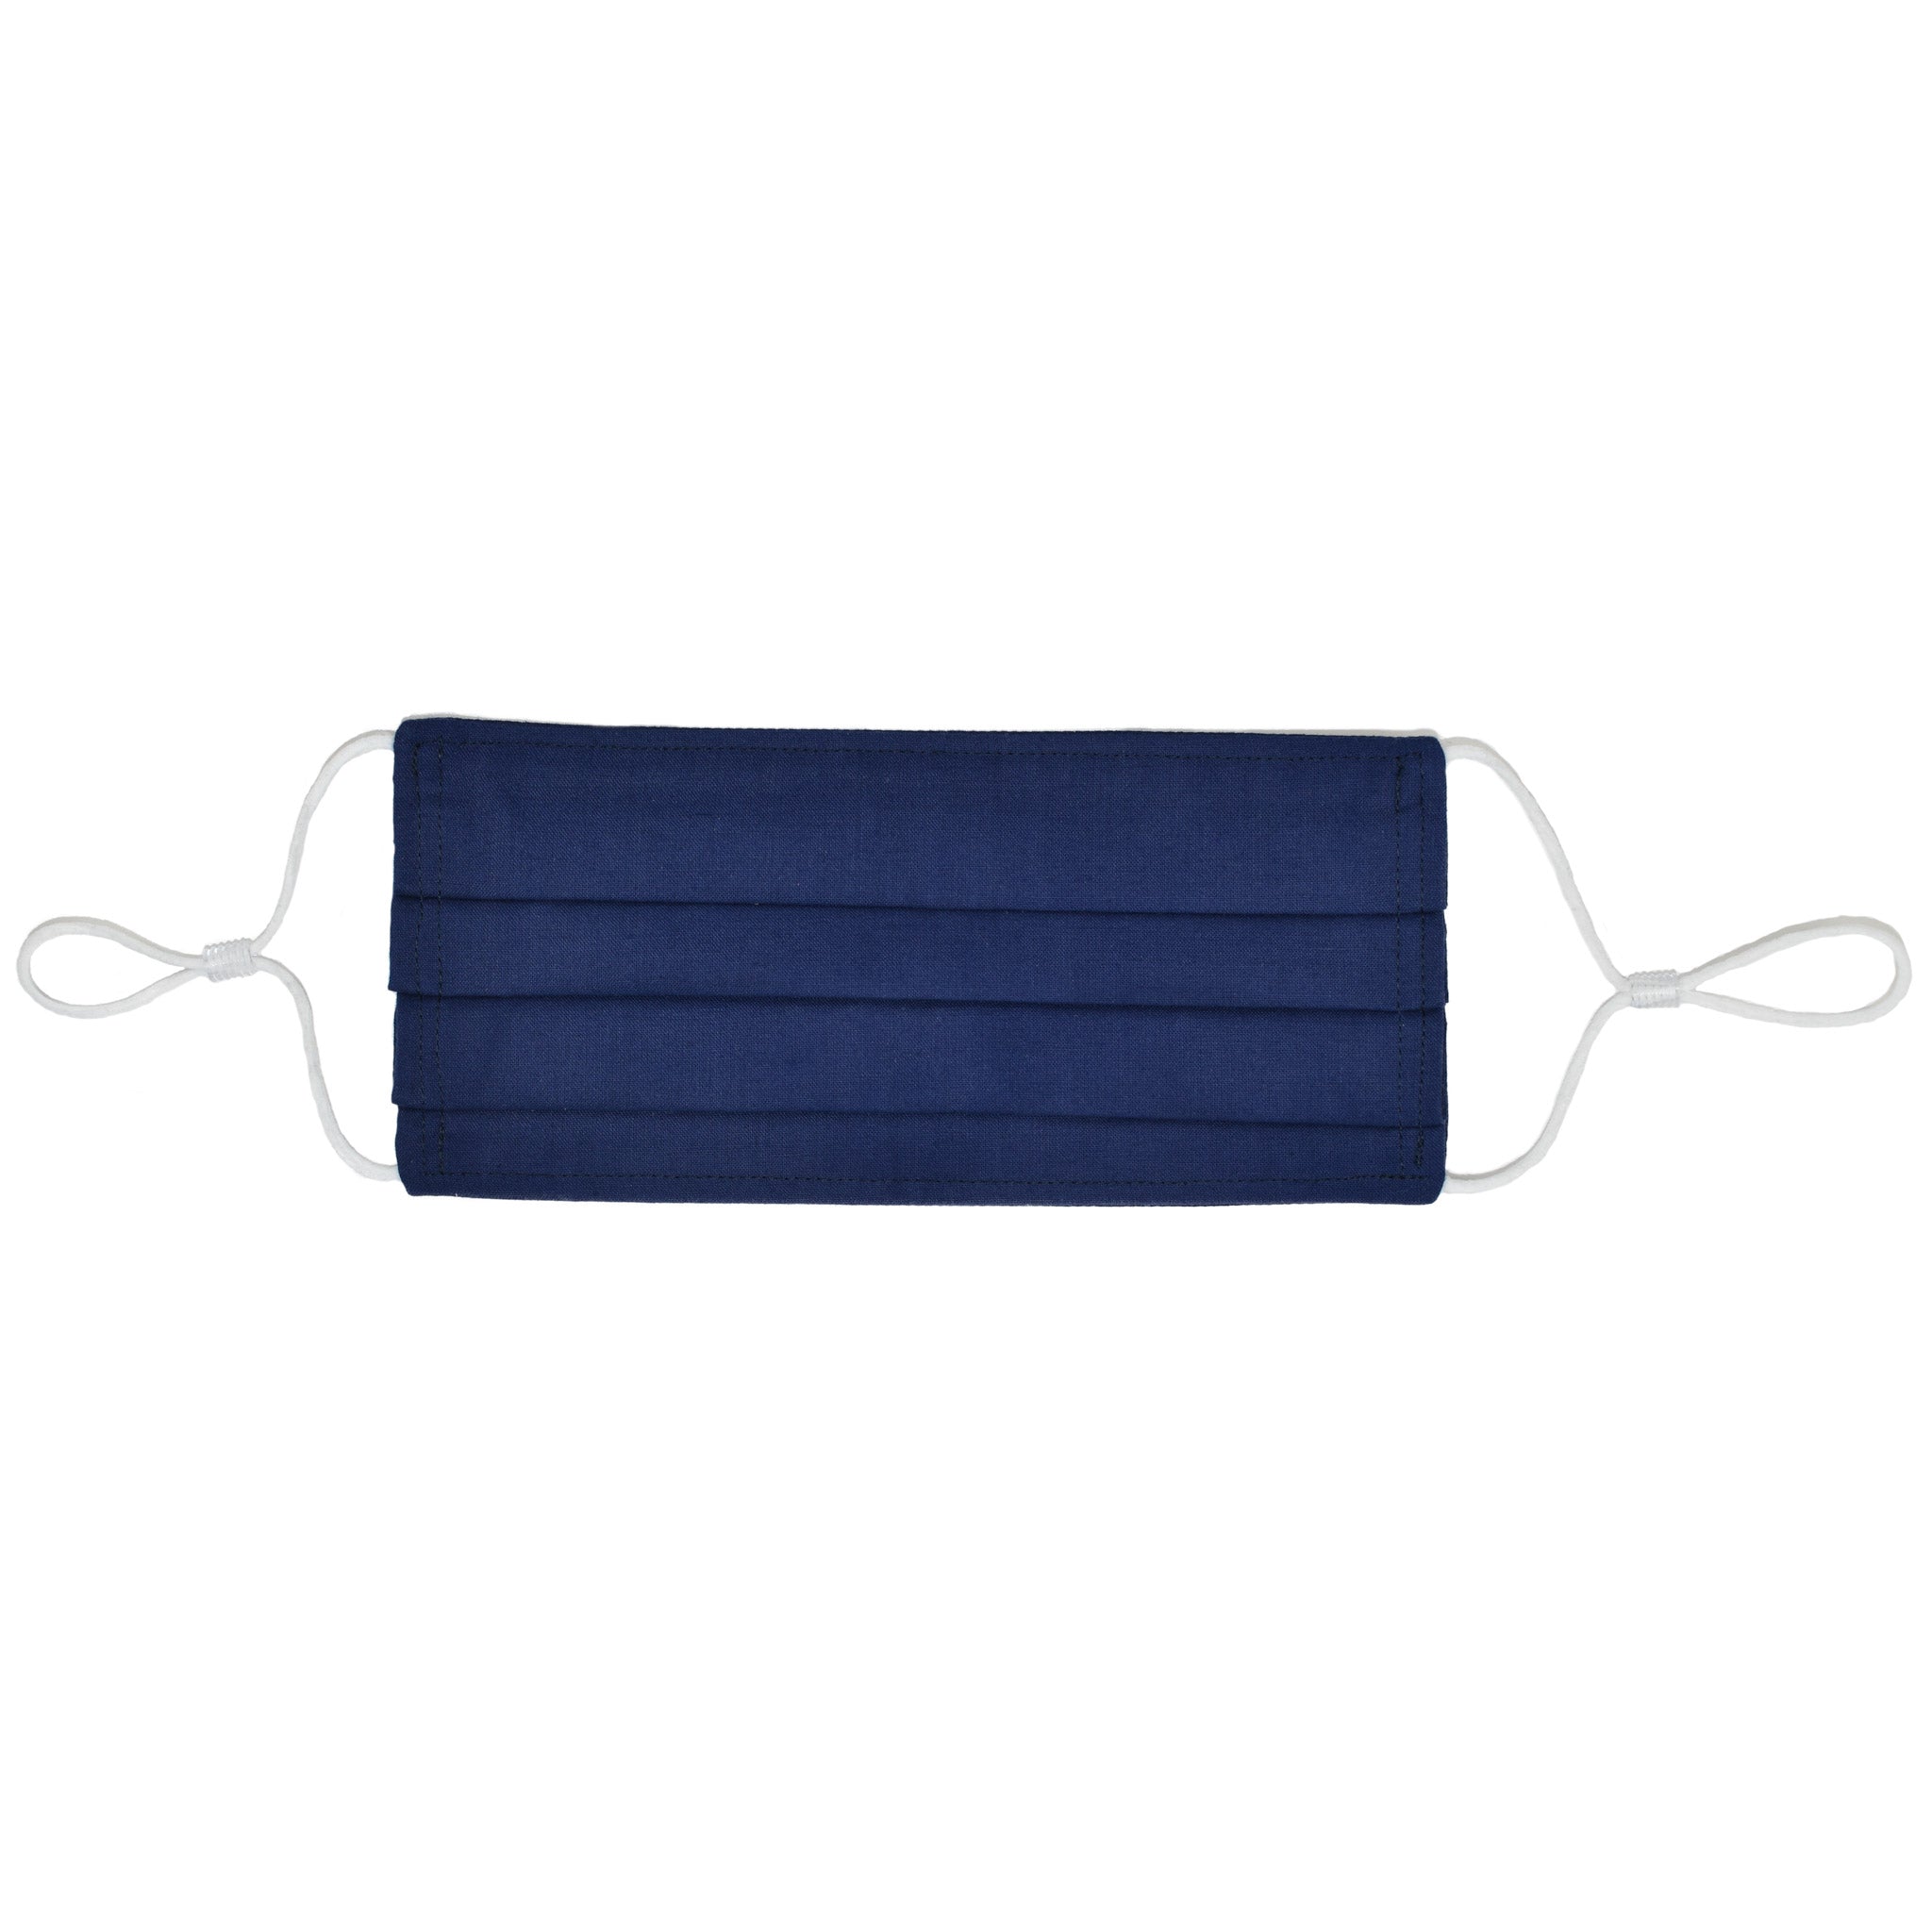 3 Layer Pleated Aviation Face Mask - Navy Blue